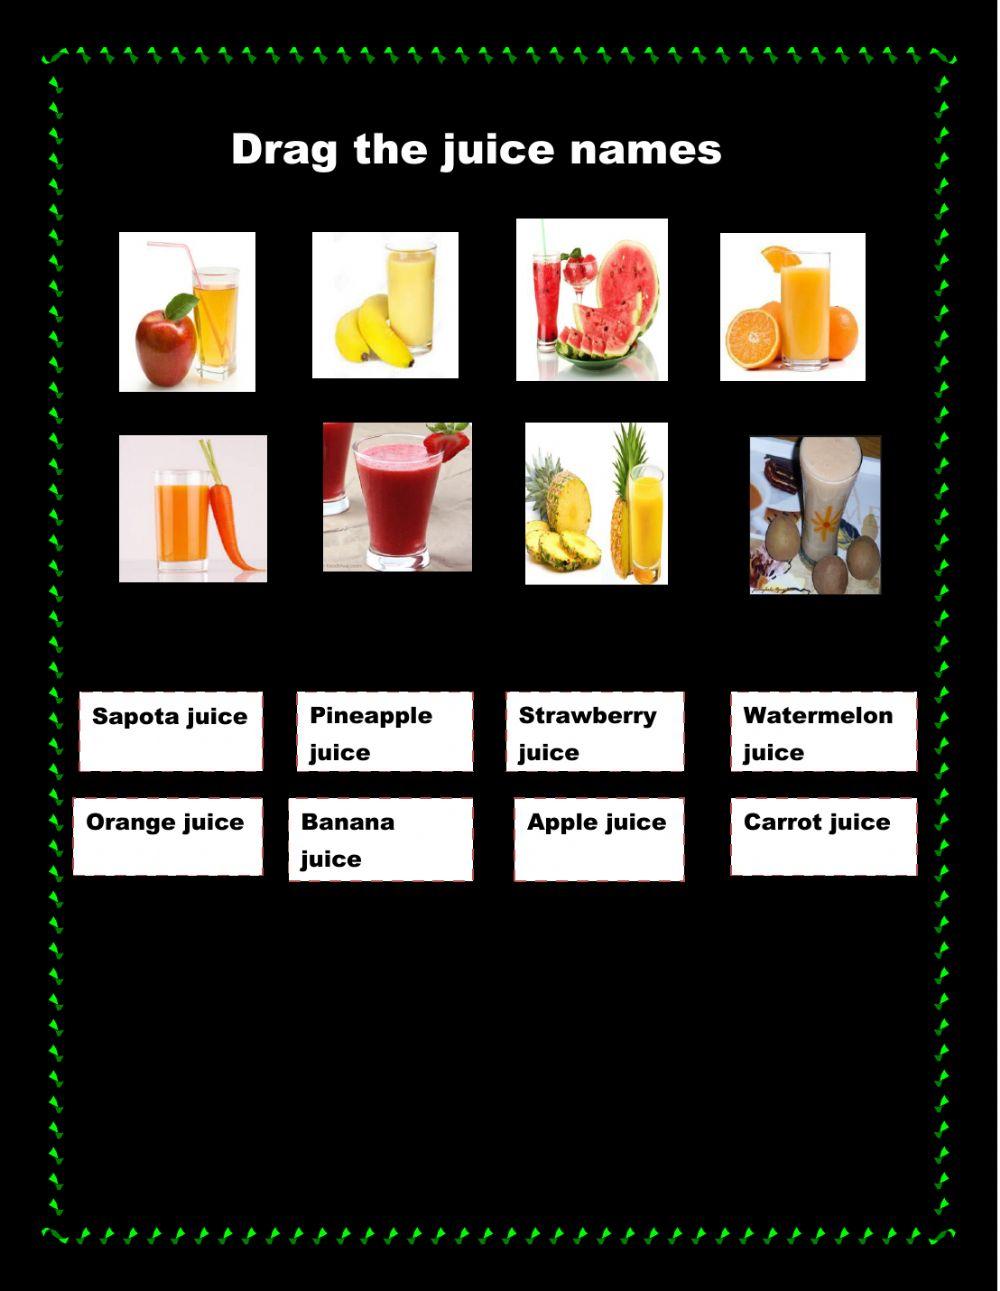 Drag the juice names